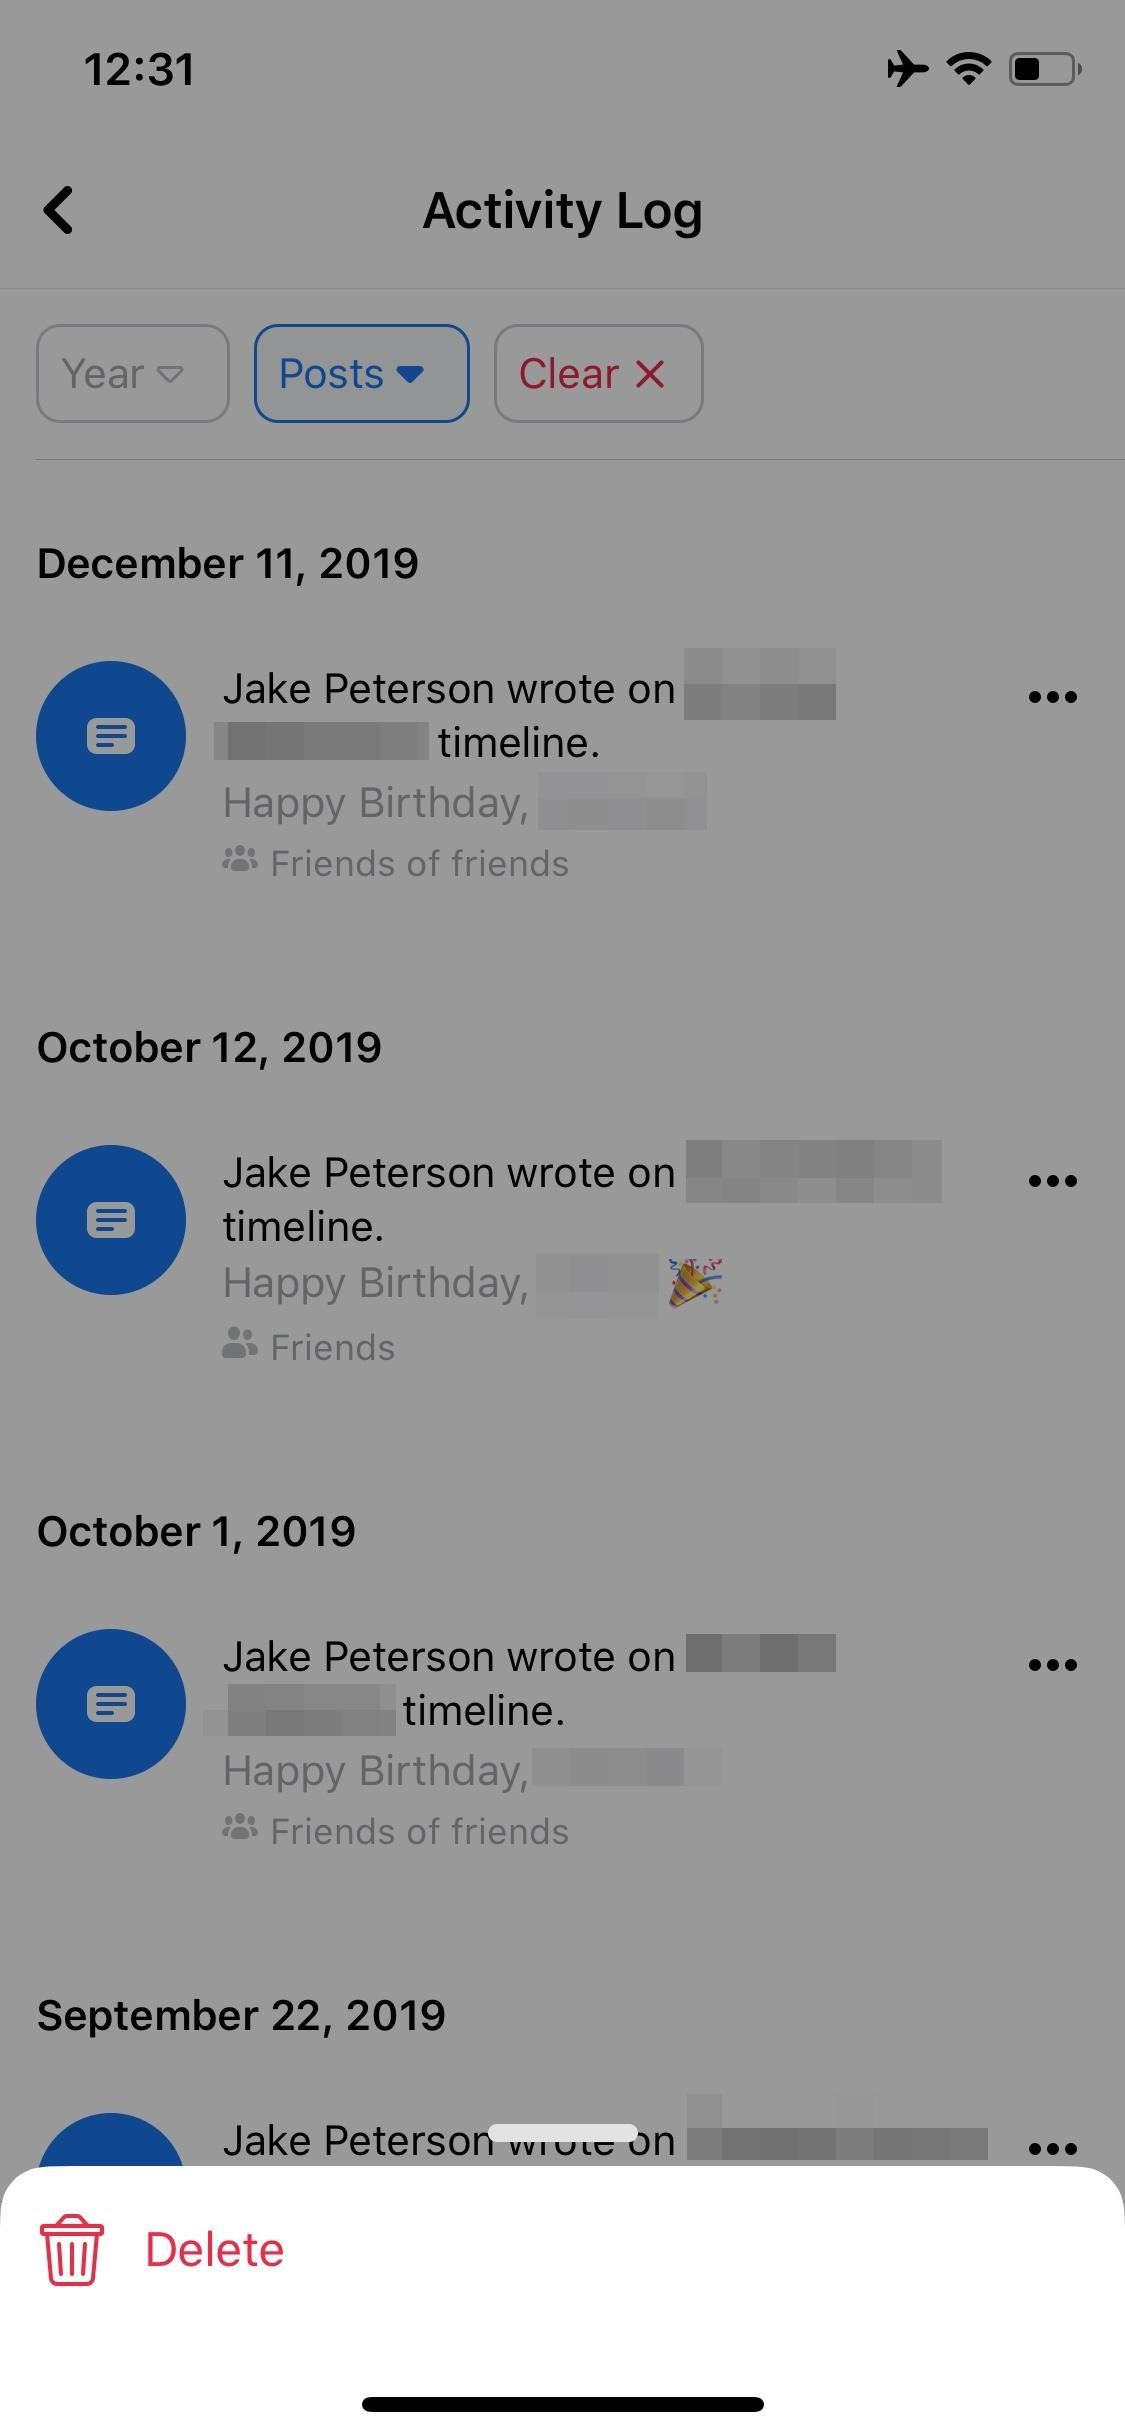 Apps & Websites Send Your Activity to Facebook — Here's How to View, Manage & Delete It